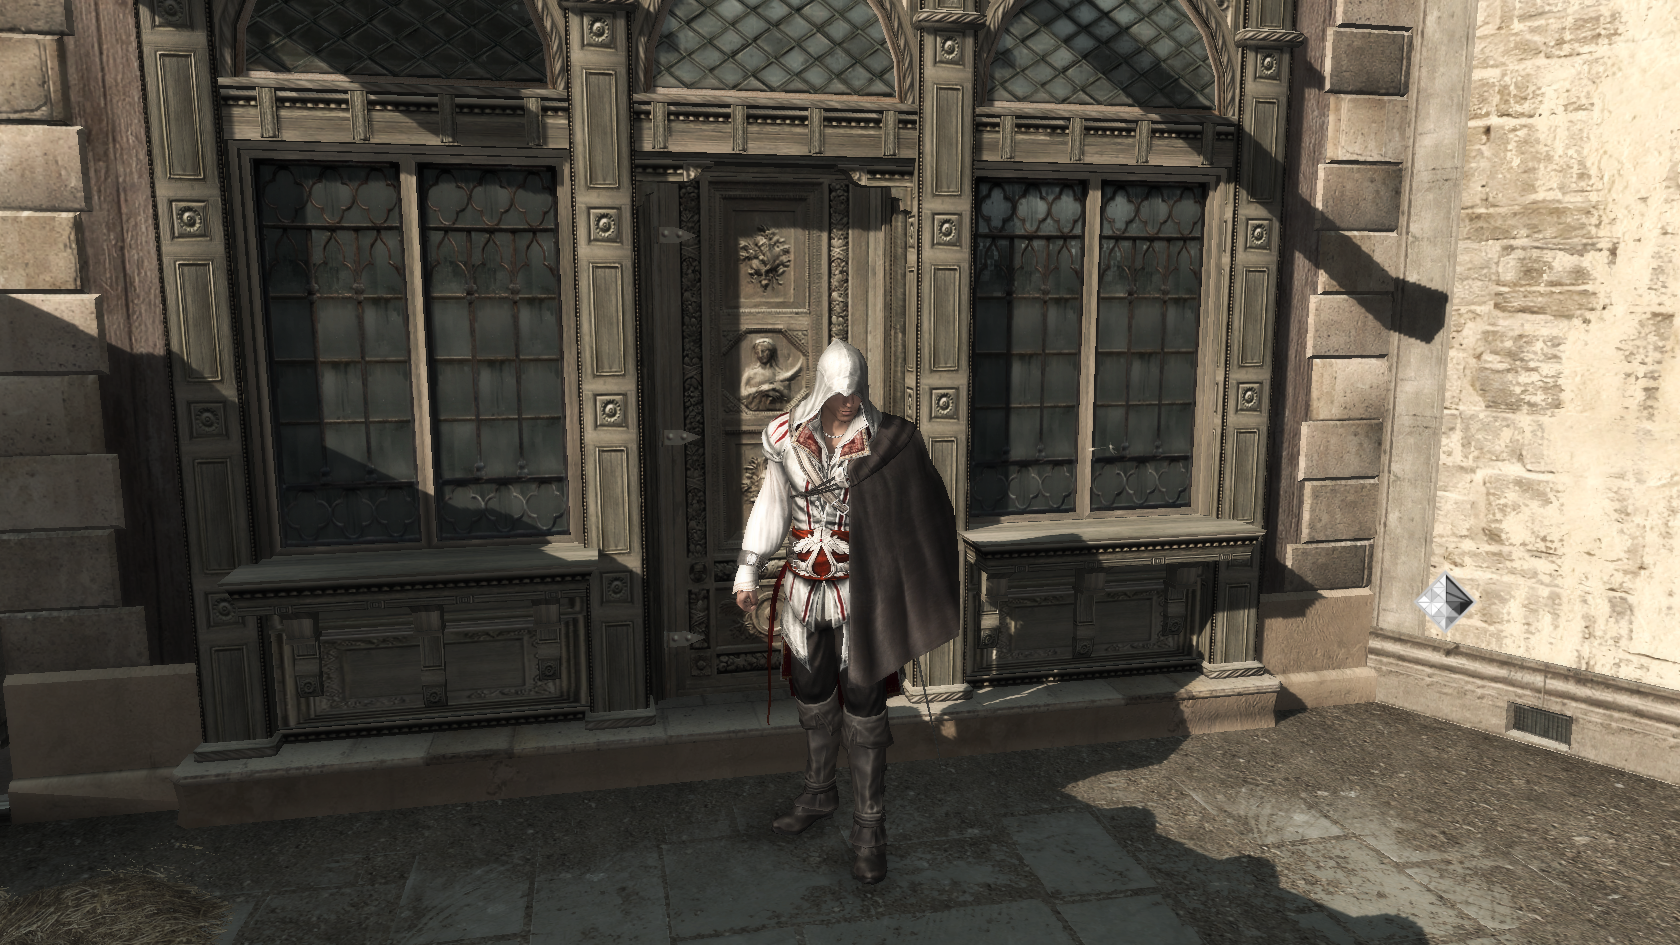 Assassins Creed 2 (II) PC [video game]